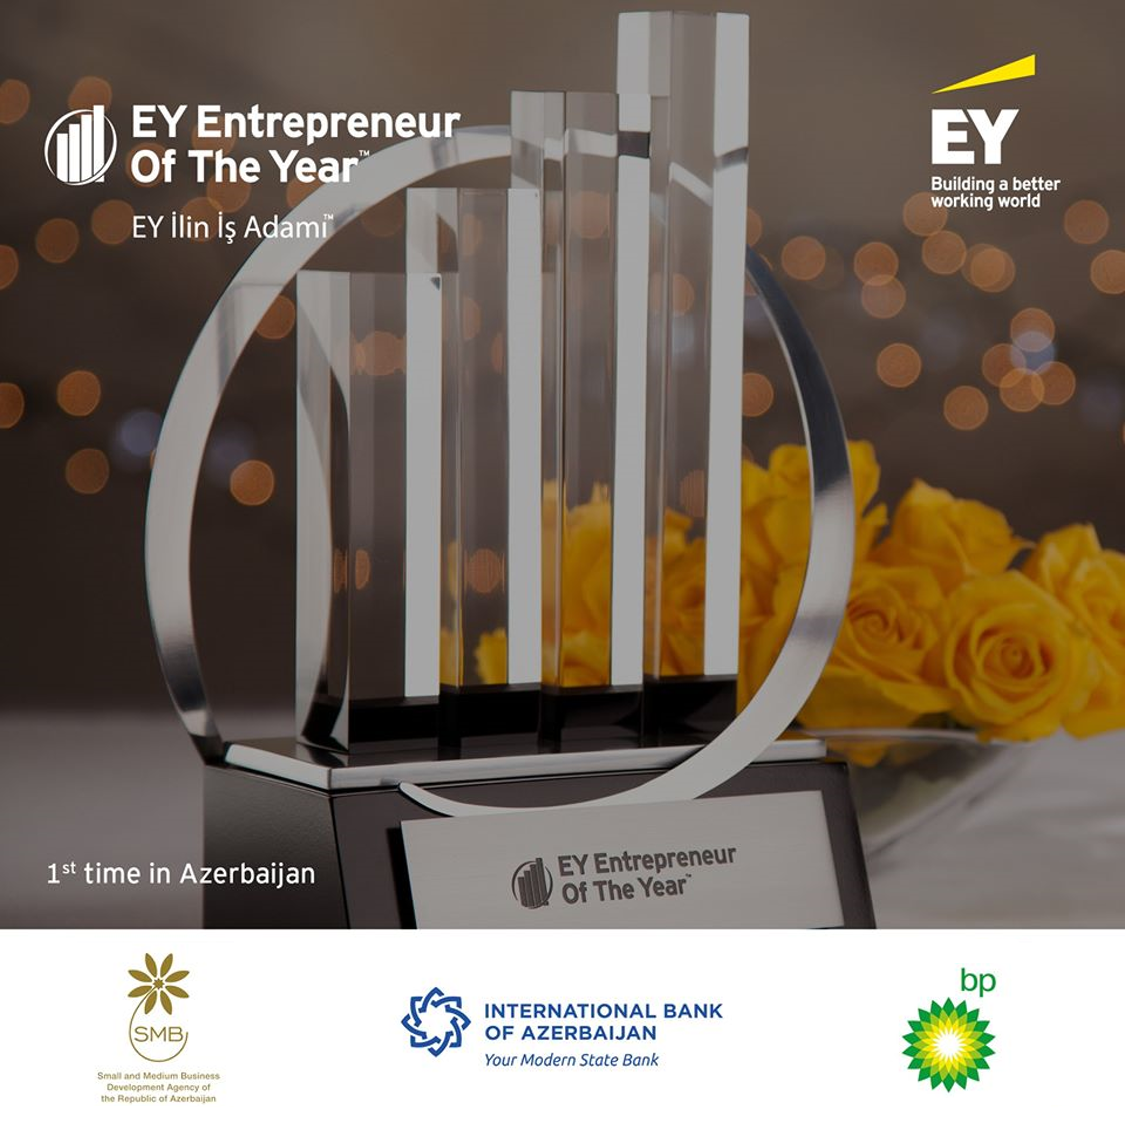 The Winner of the “EY Entrepreneur of The Year™” Competition has been announced 